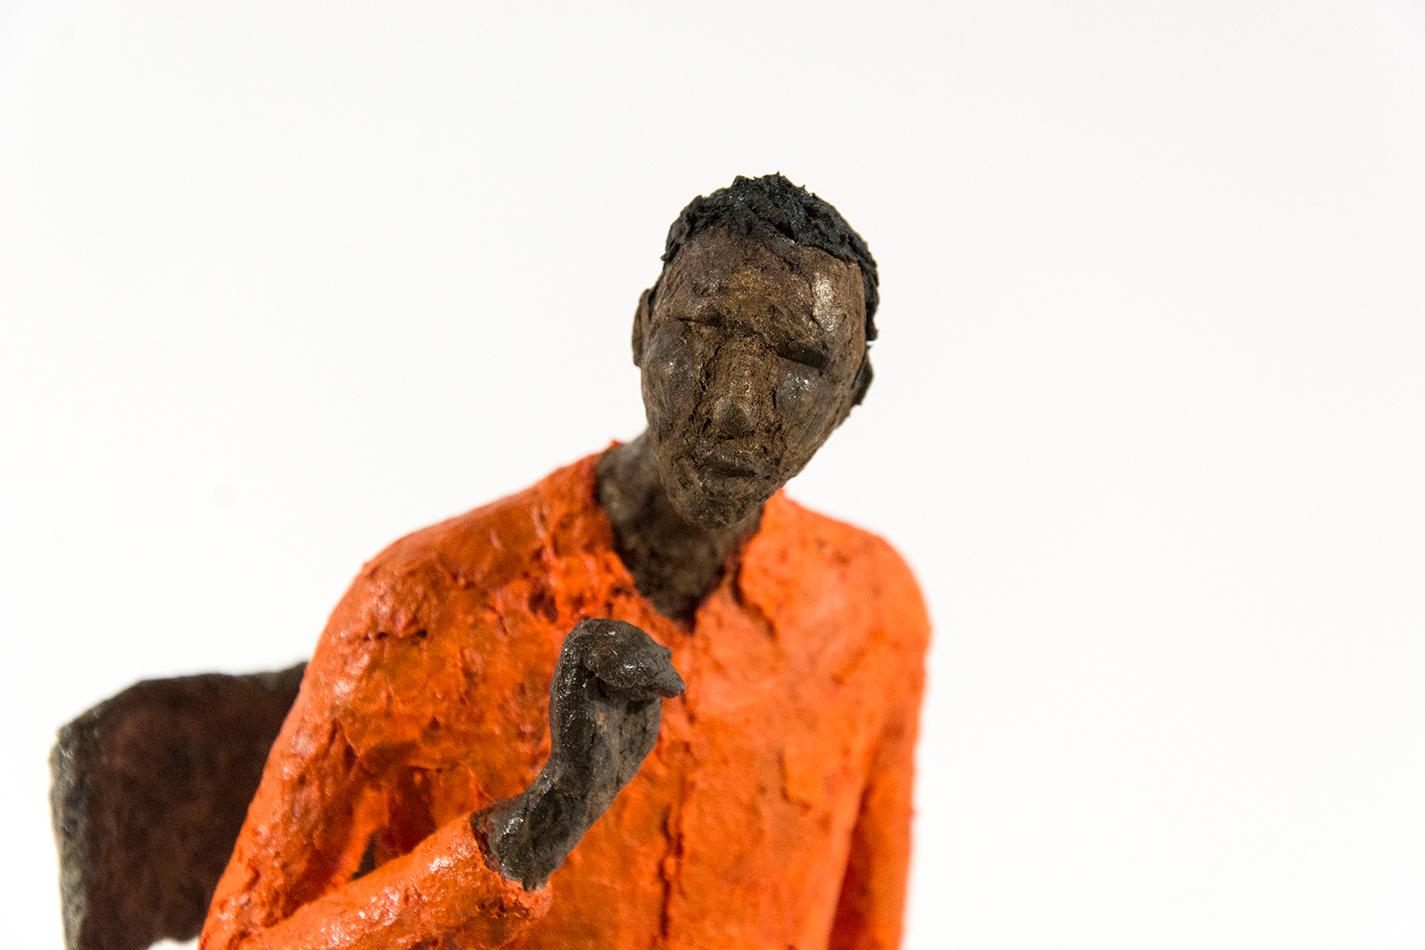 A pair of seated figures in a blue and orange wait patiently in this contemplative paper mache sculpture by Paul Duval. 

Paul Duval is a member of the Canadian Sculptors Society and of the Conseil de la sculpture du Québec. He studied Monumental